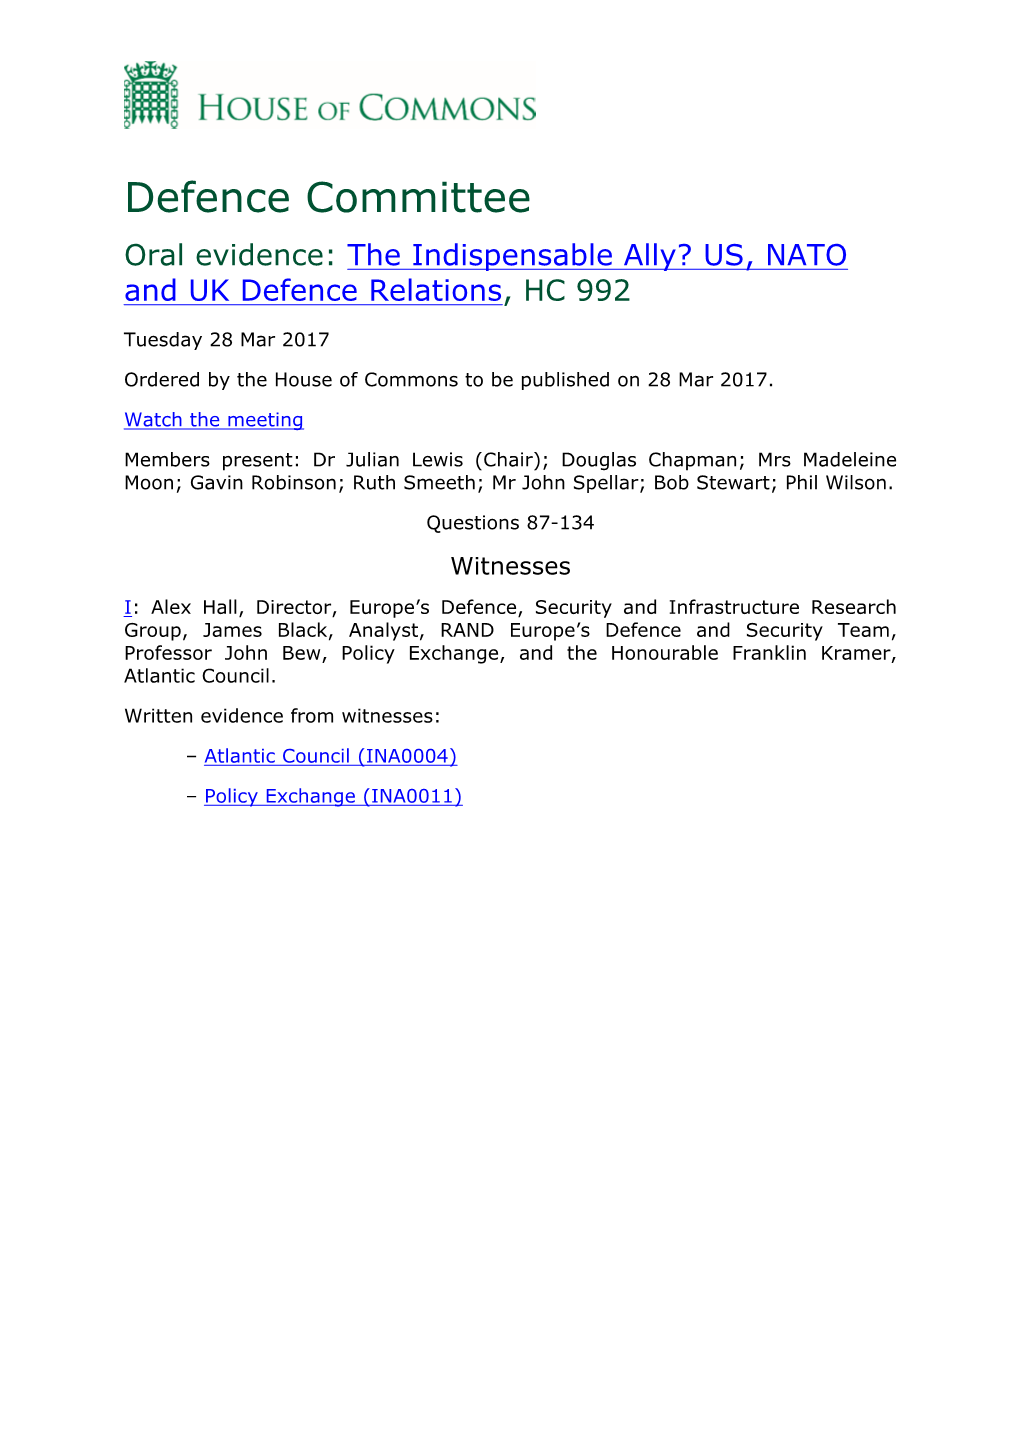 The Indispensable Ally? US, NATO and UK Defence Relations, HC 992